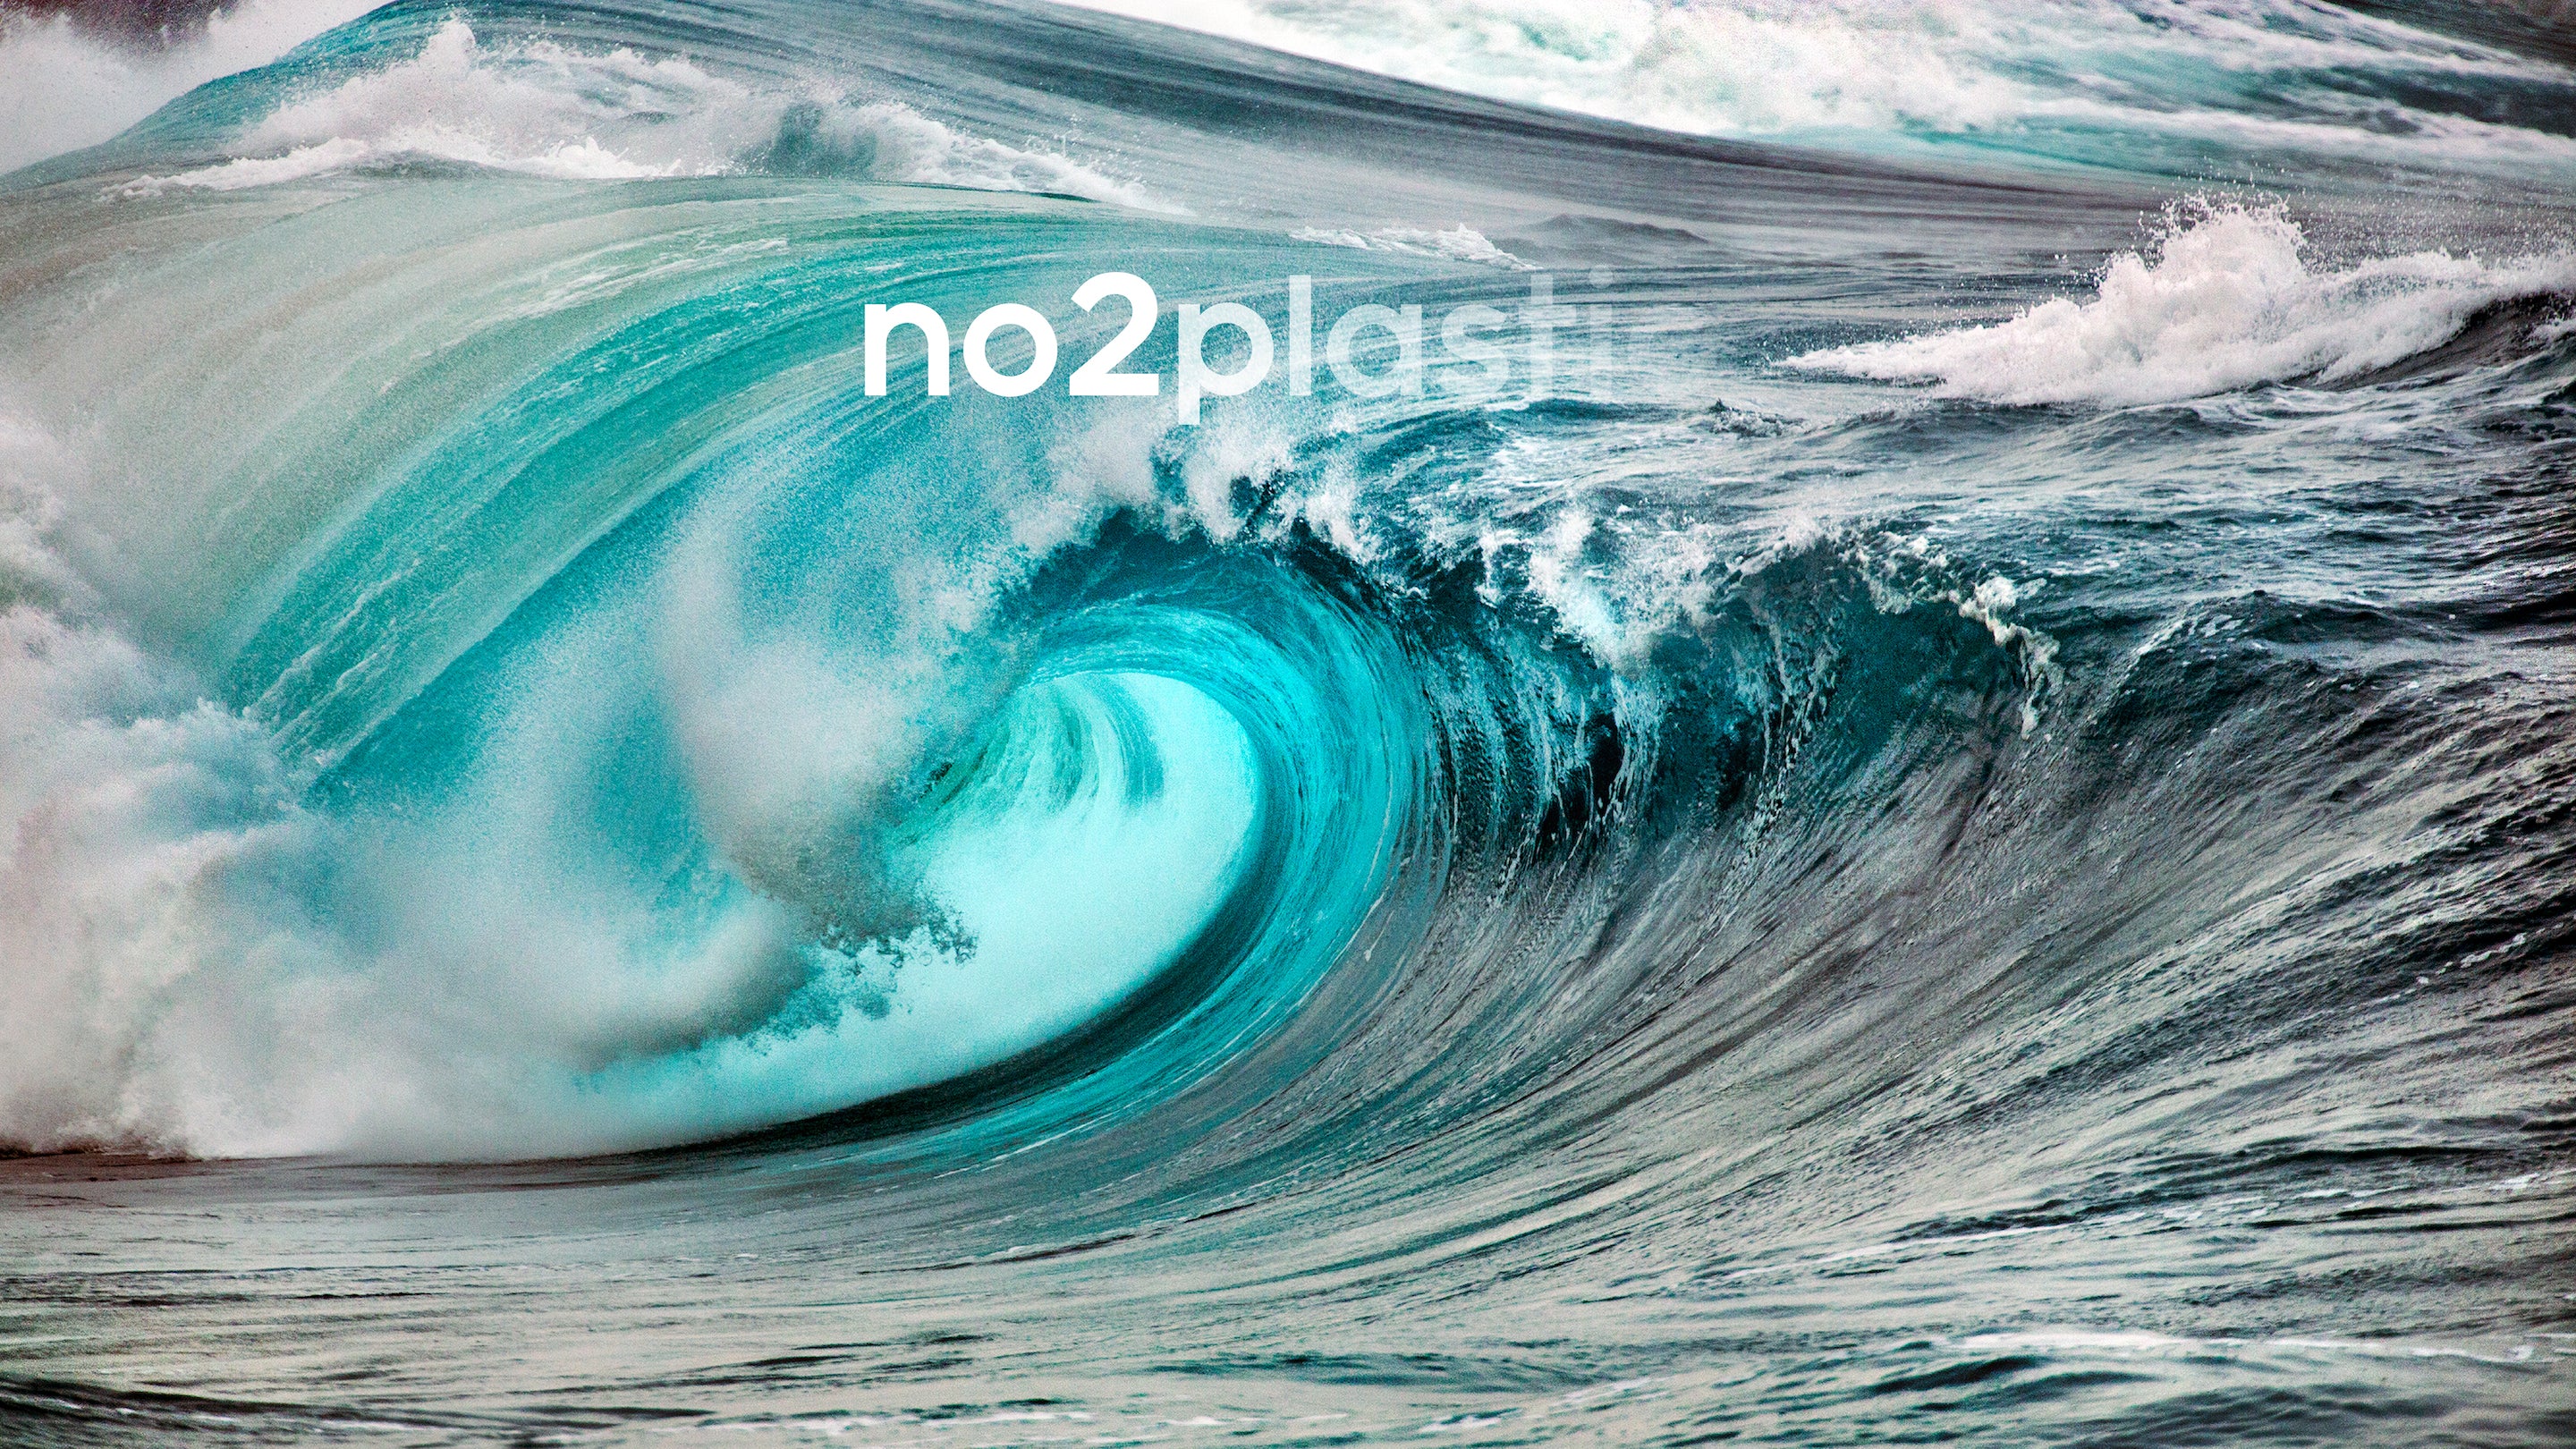 WE BELIEVE The problems with single-use plastics are growing daily and we need to stop filling our landfills and oceans with plastic waste. Take the no2plastic pledge.